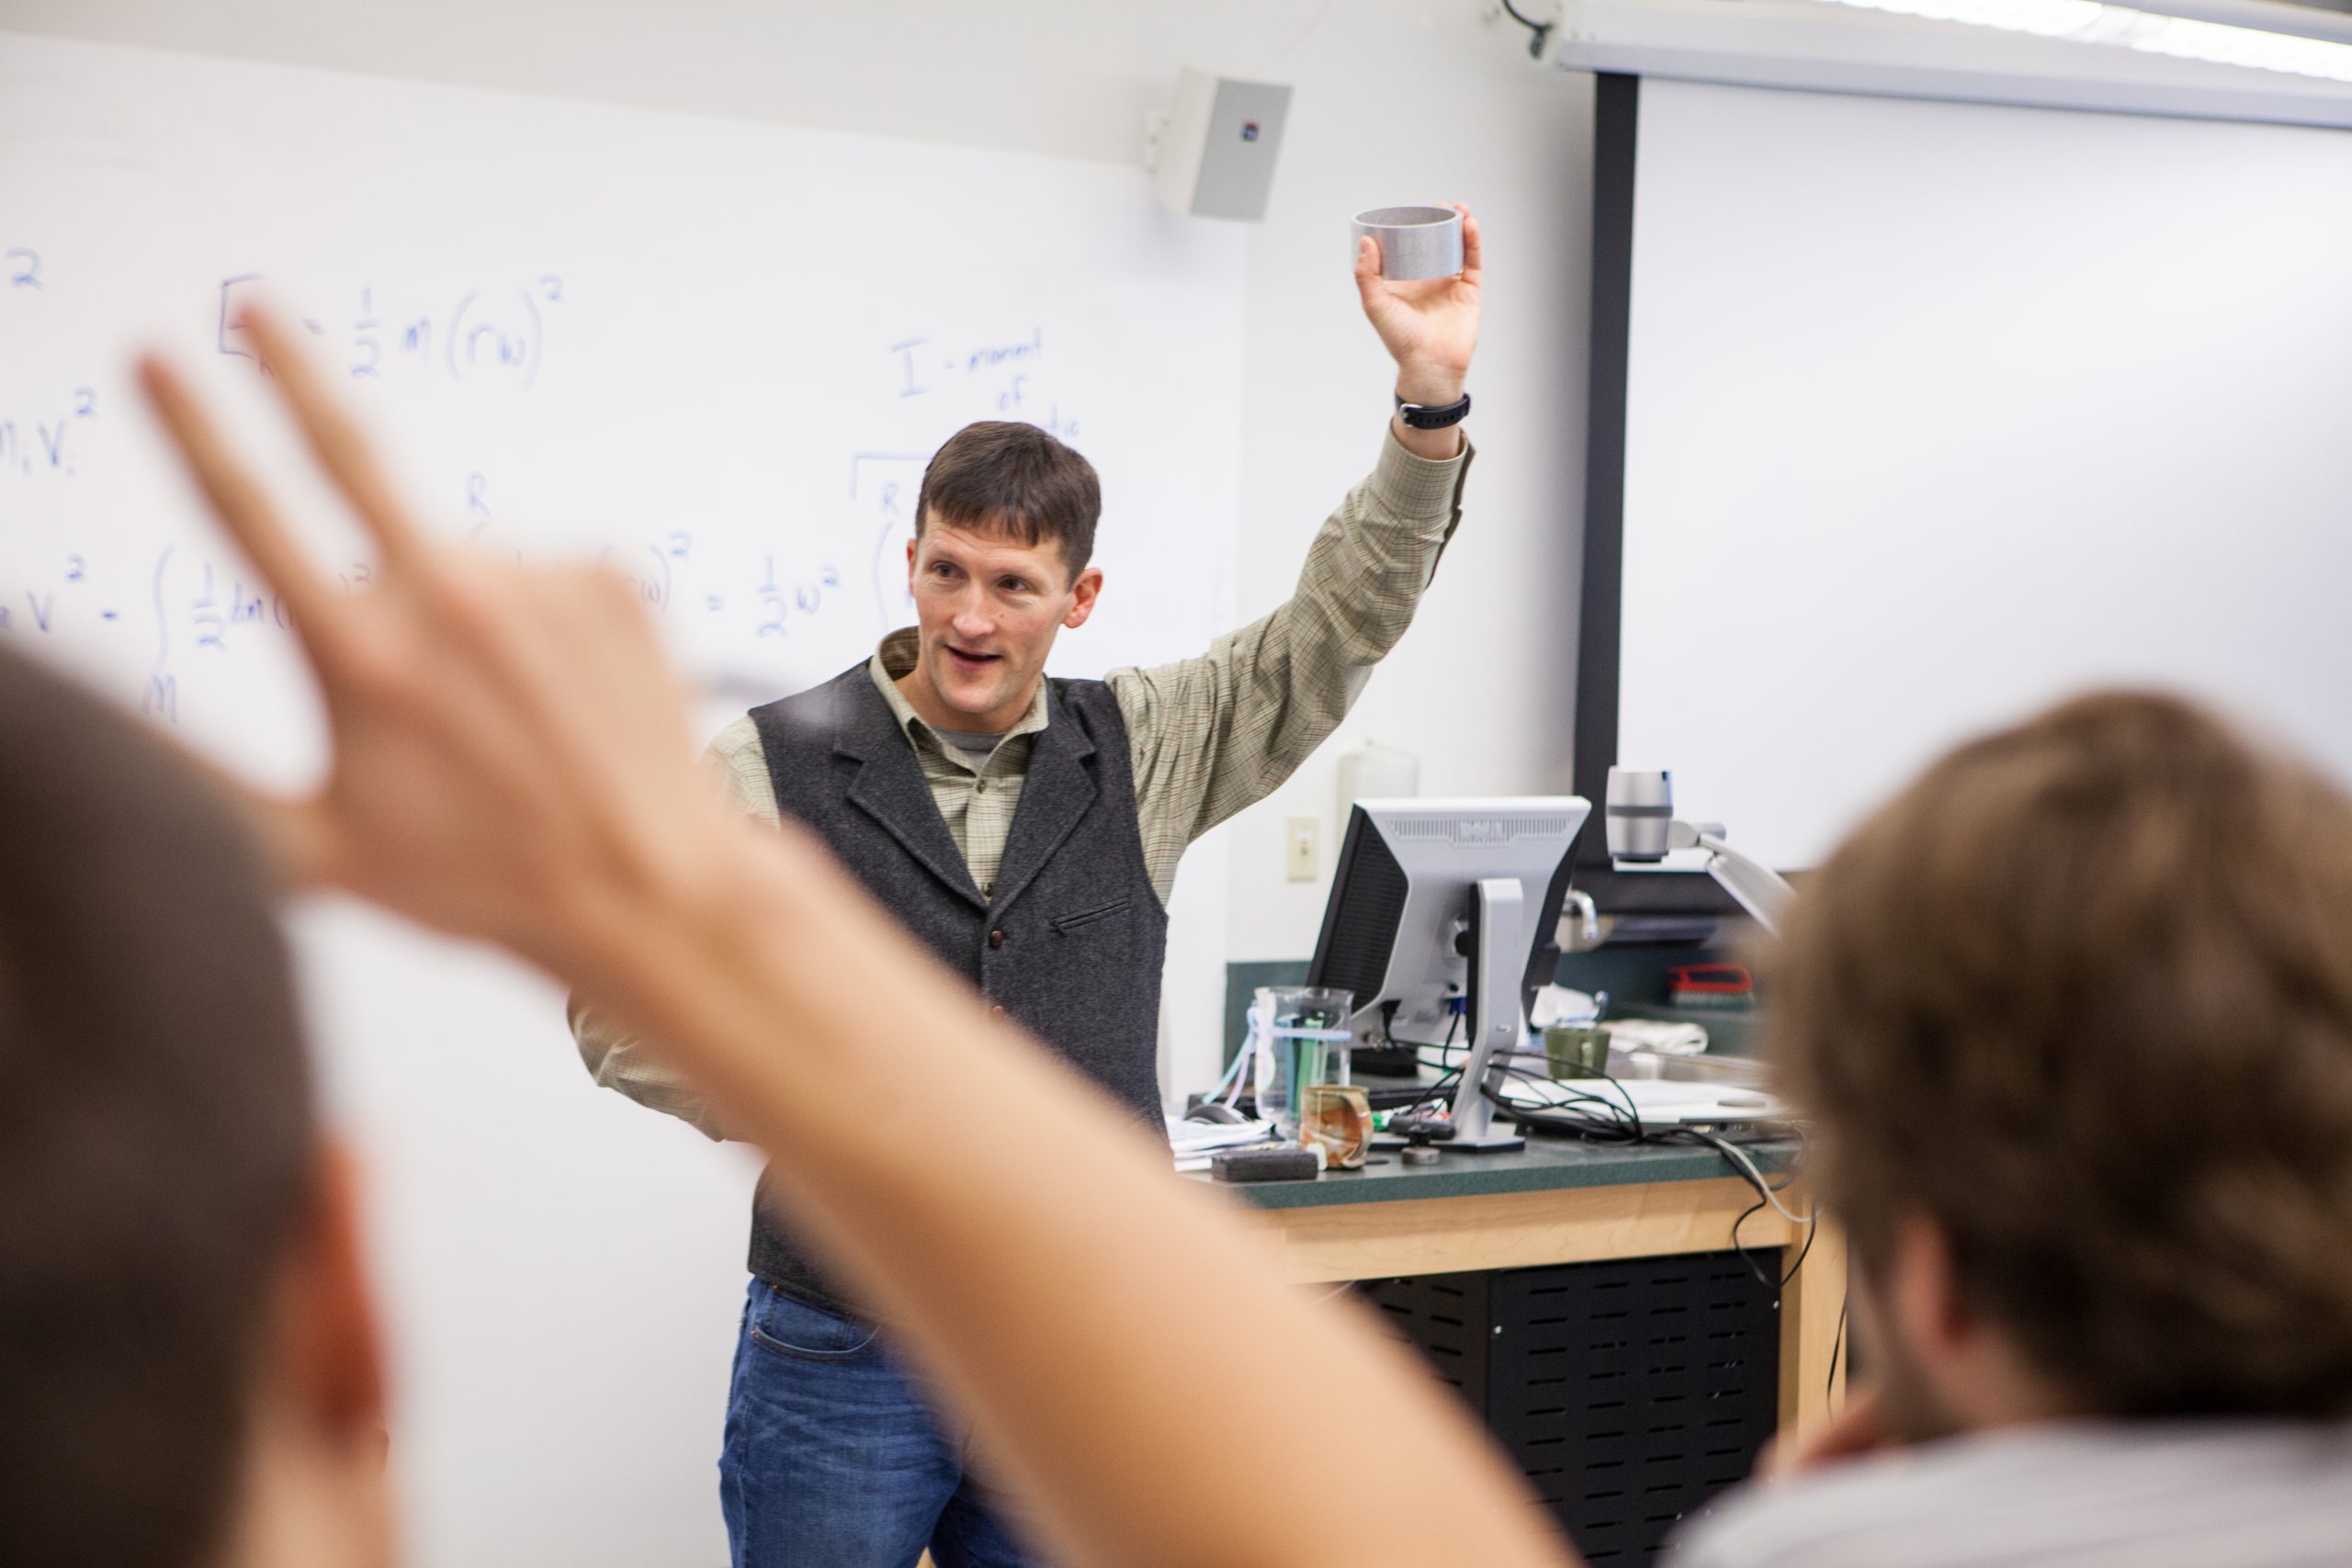 A professor stands with a ring raised above his head looking around the classroom. A student in the foreground raises their hand.